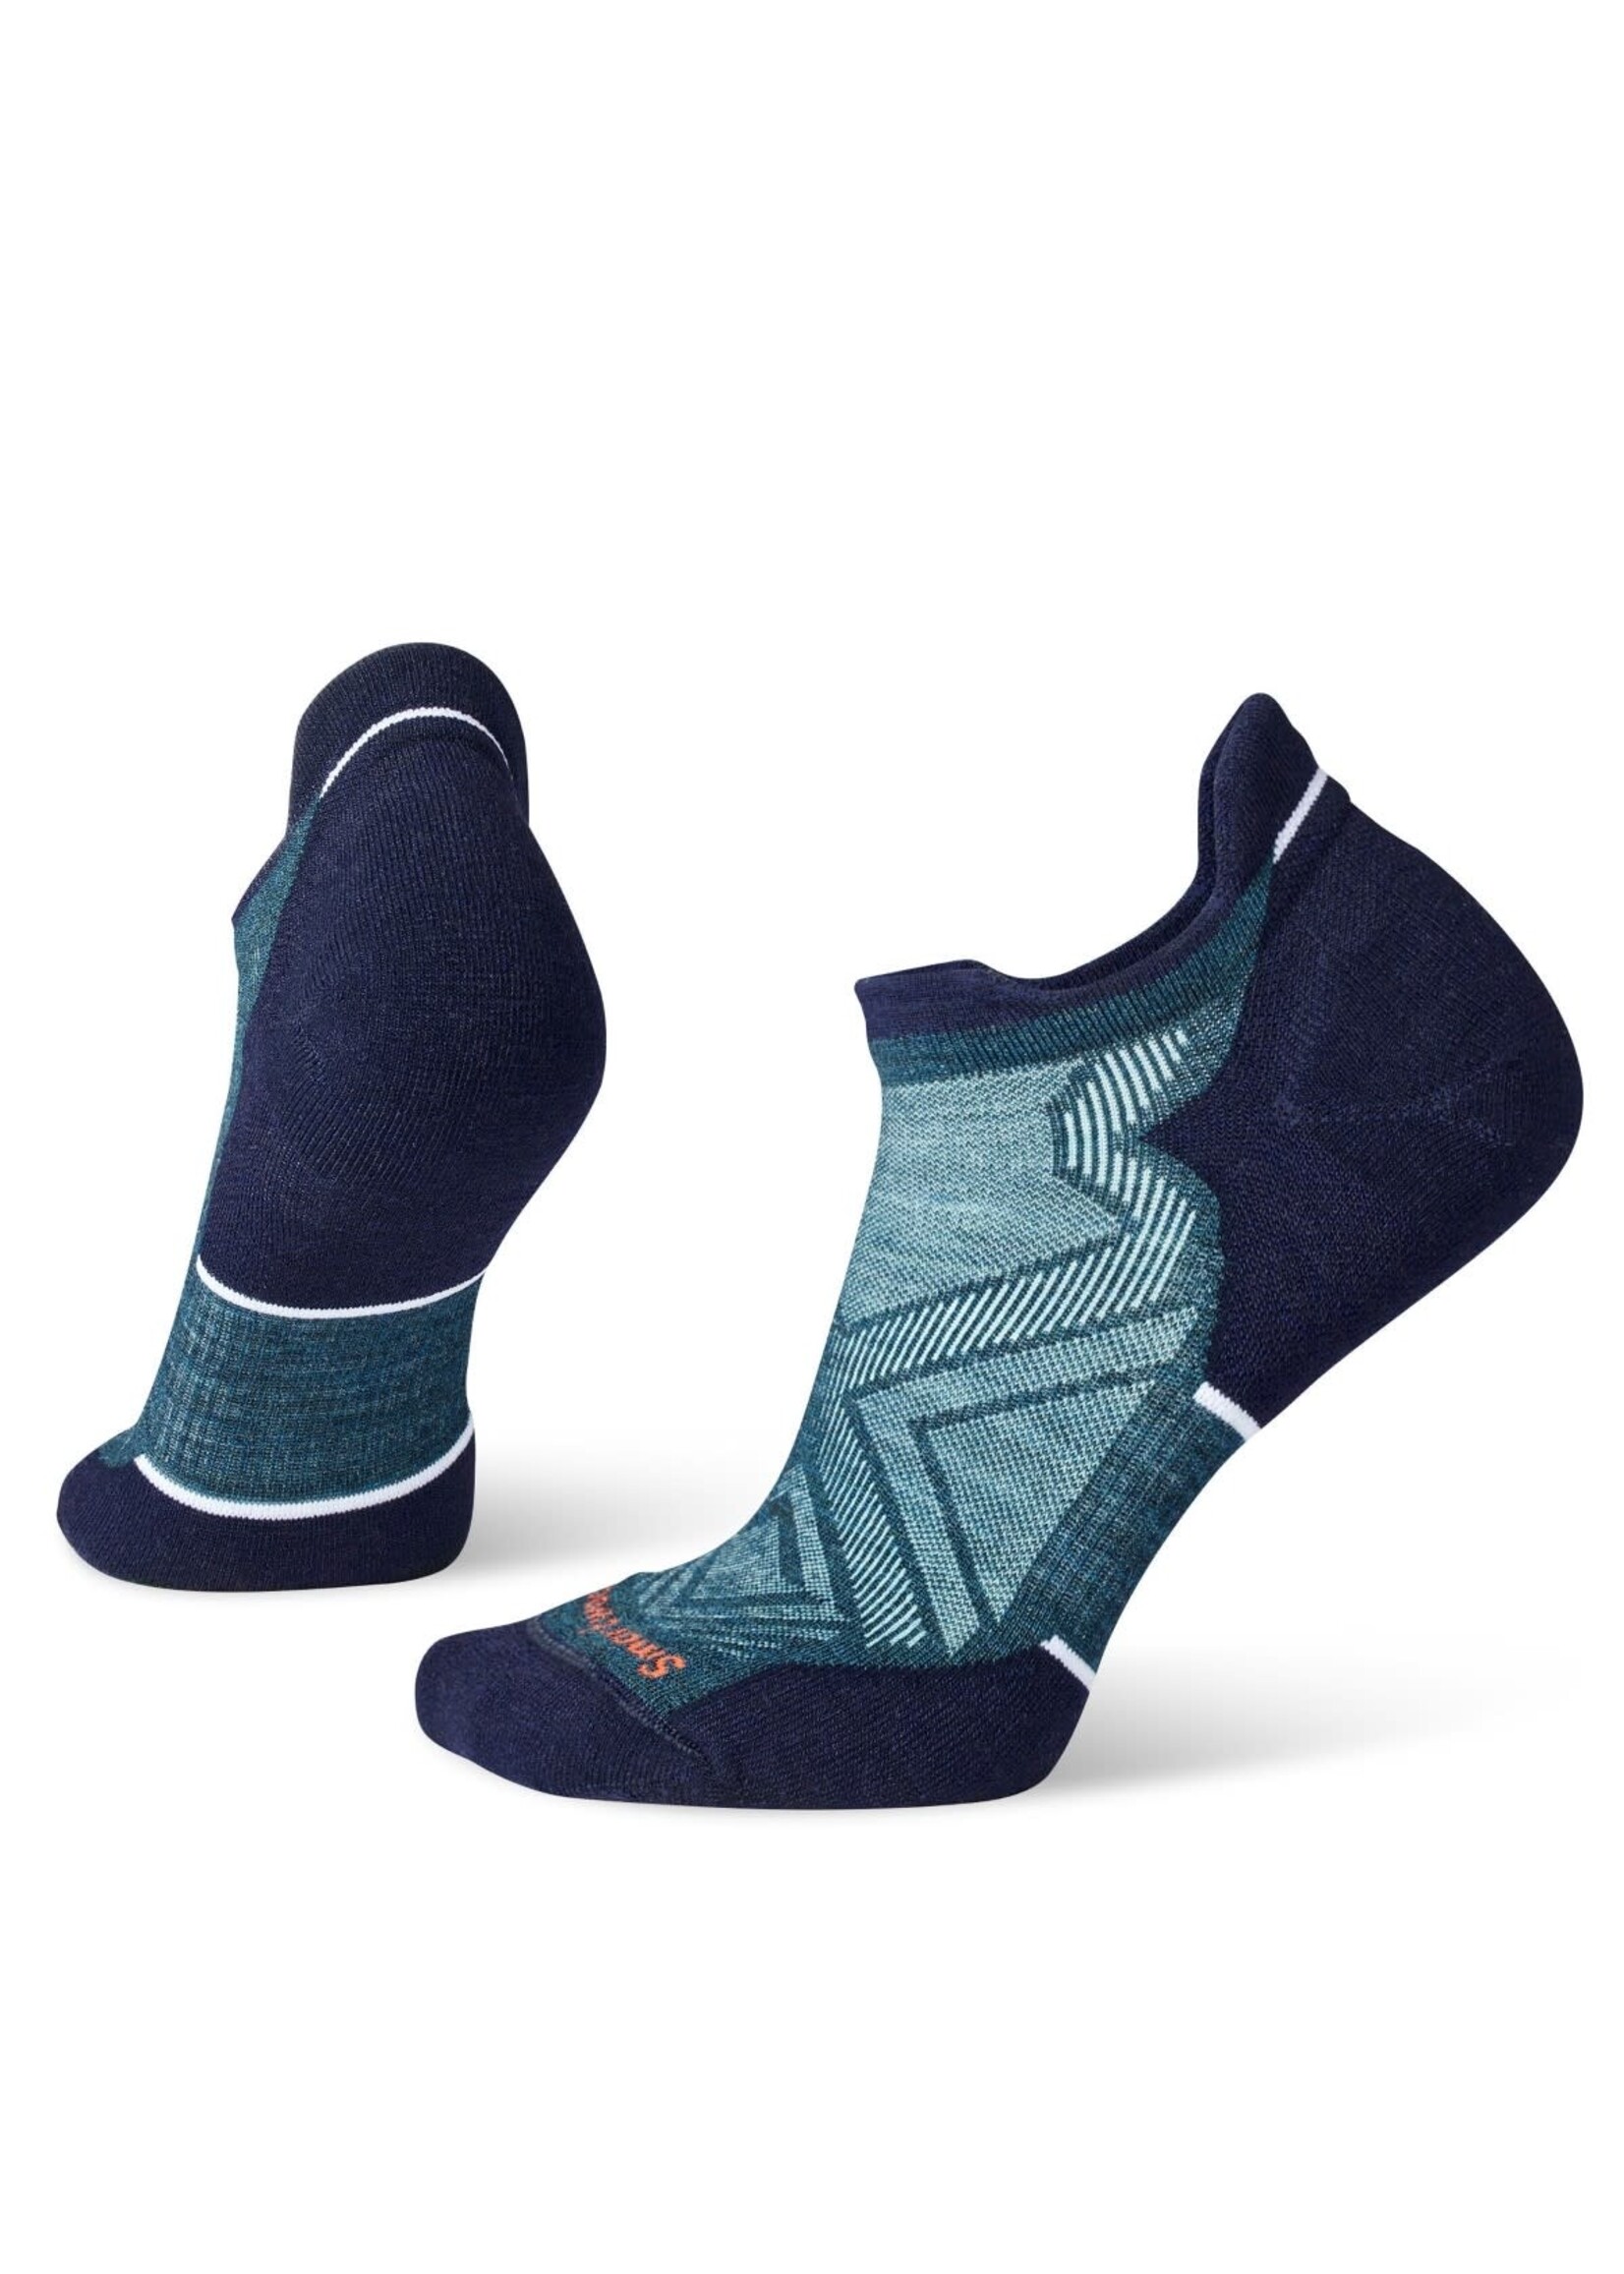 Smartwool Chaussette de course Smartwool Run Targeted Low Ankle - Femme